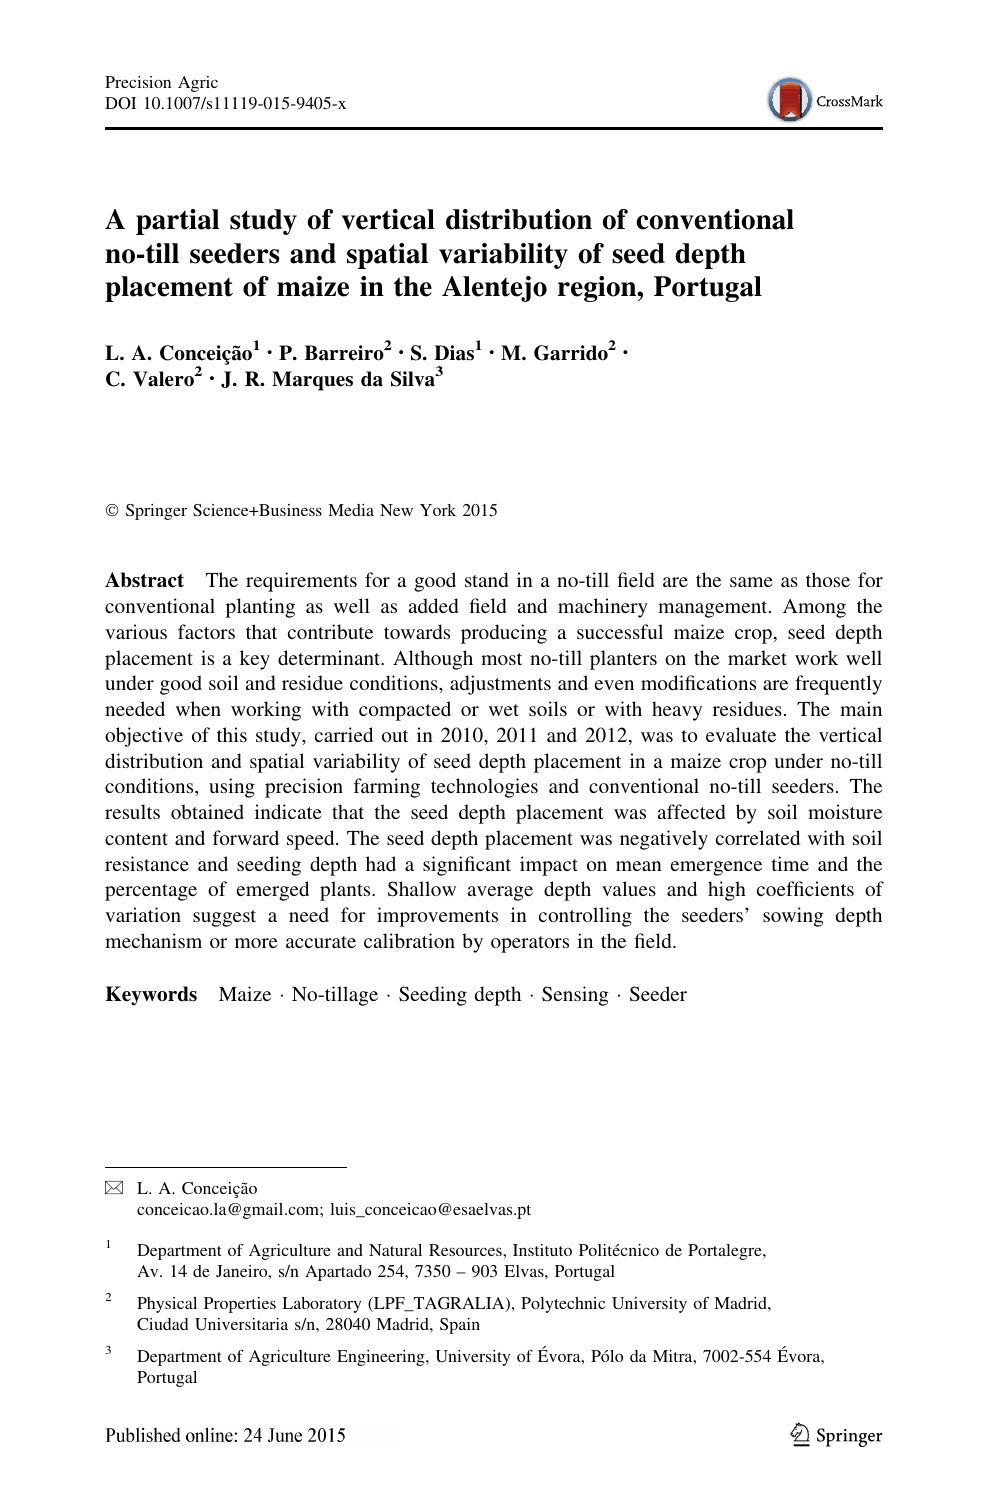 A Partial Study Of Vertical Distribution Of Conventional No Till Seeders And Spatial Variability Of Seed Depth Placement Of Maize In The Alentejo Region Portugal Topic Of Research Paper In Agriculture Forestry